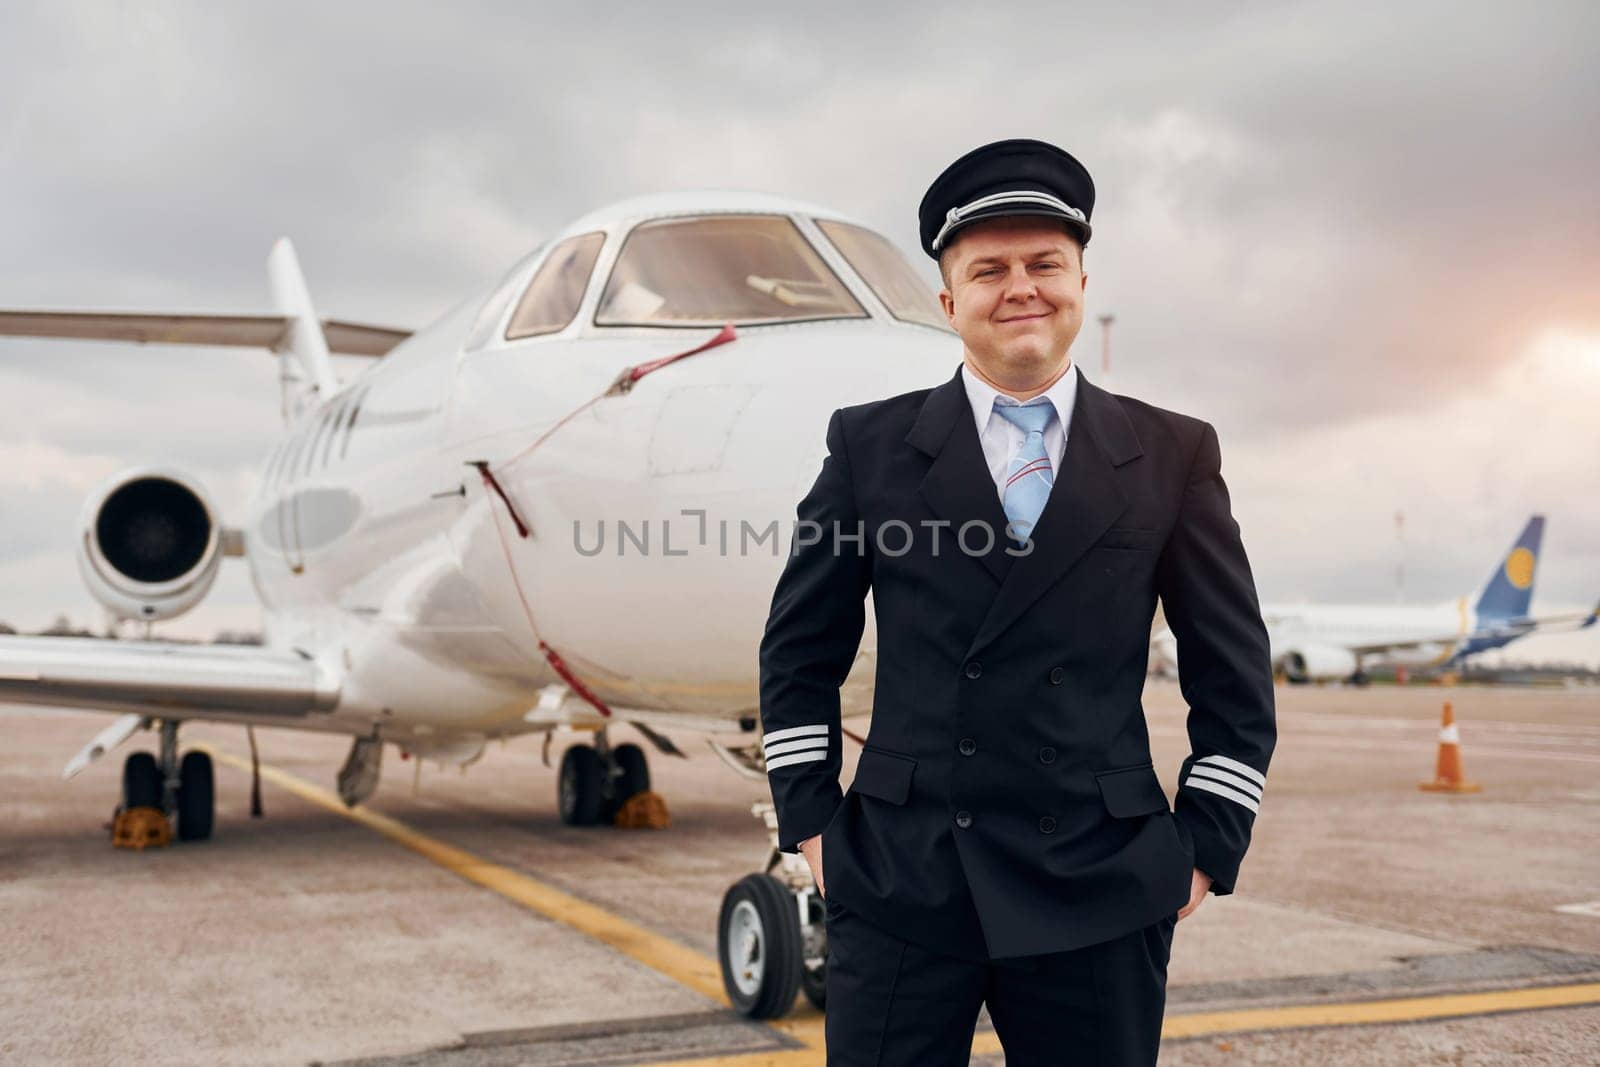 Posing for a camera. Experienced pilot in uniform standing outside near plane.